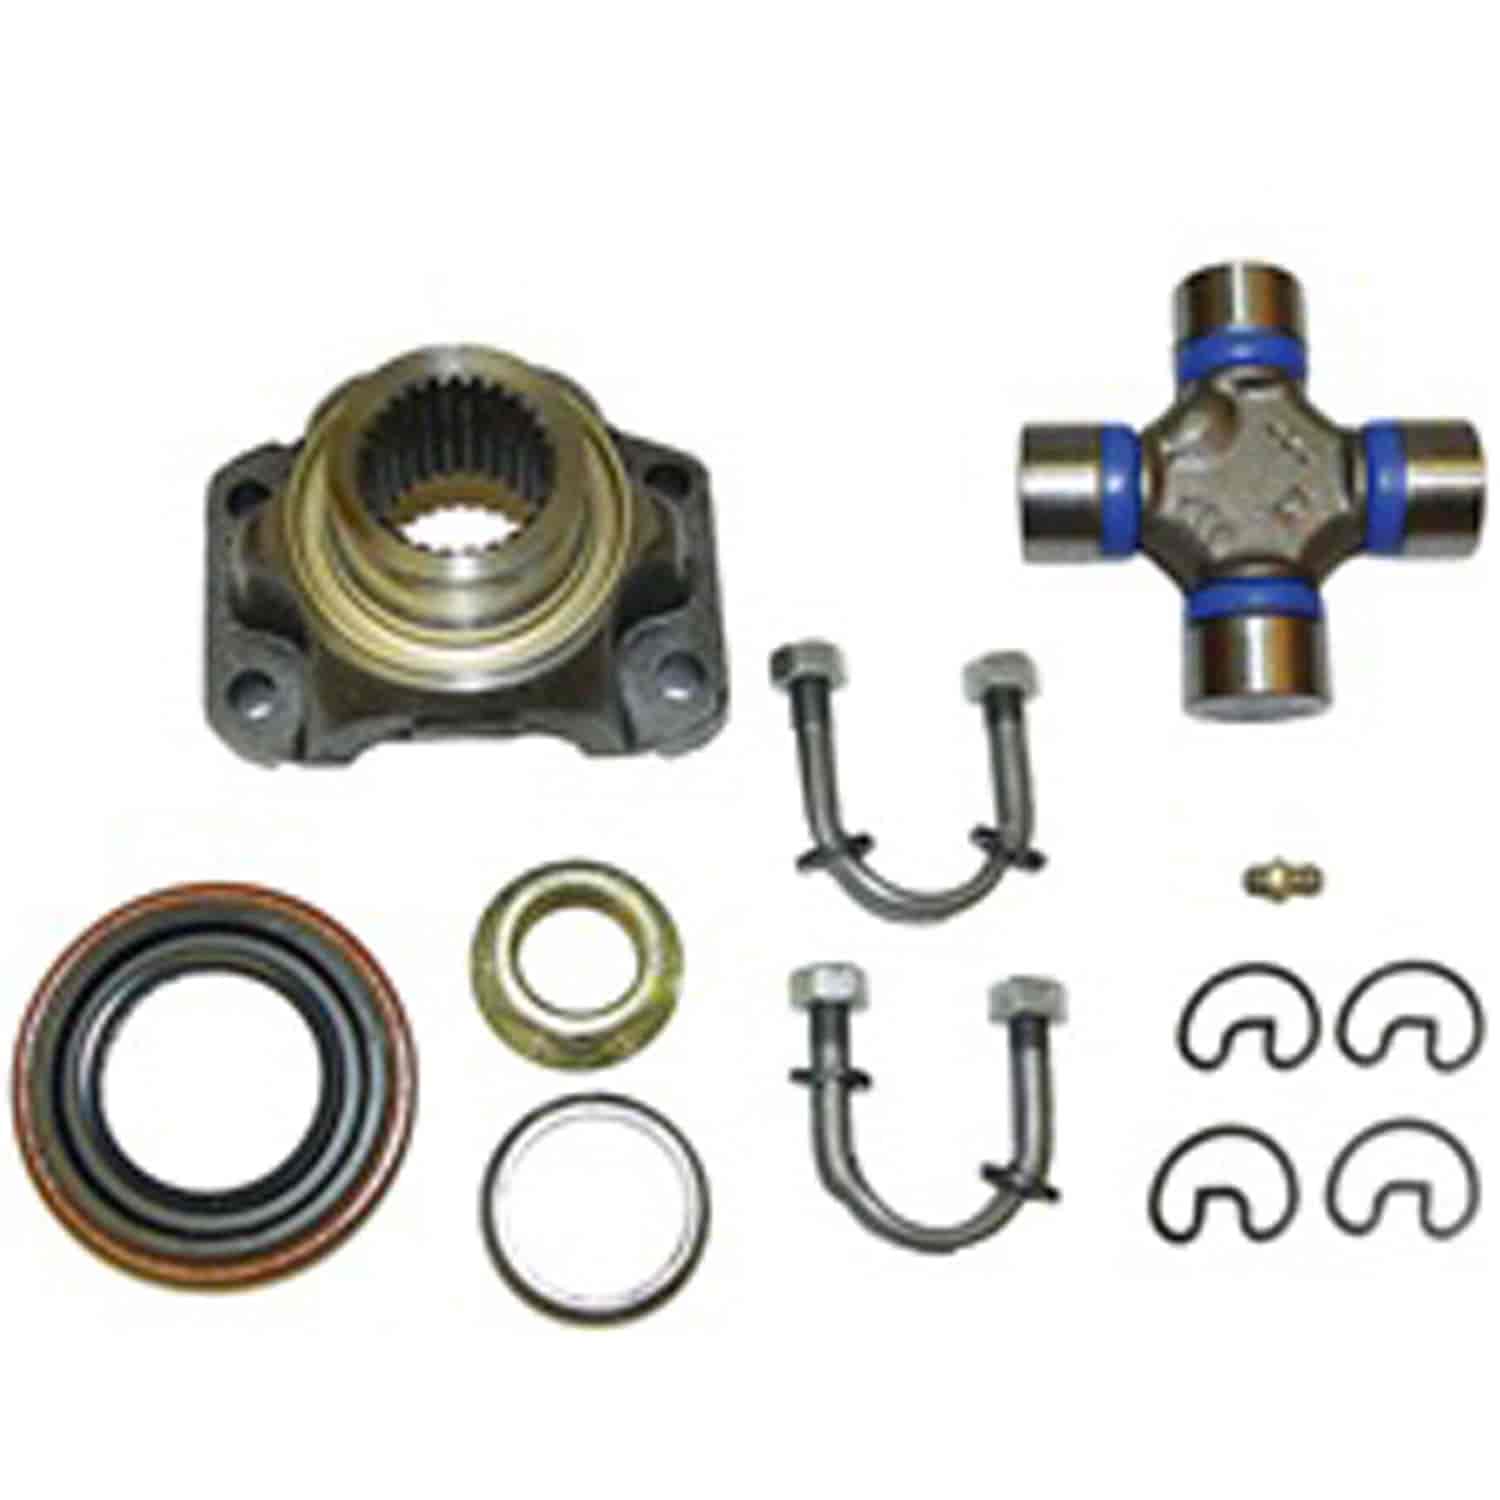 Yoke Kit U-Bolt Style for d30 Includes Yoke Pinion Spacer Pinion Seals U-Joints and Pinion Nut 72-83